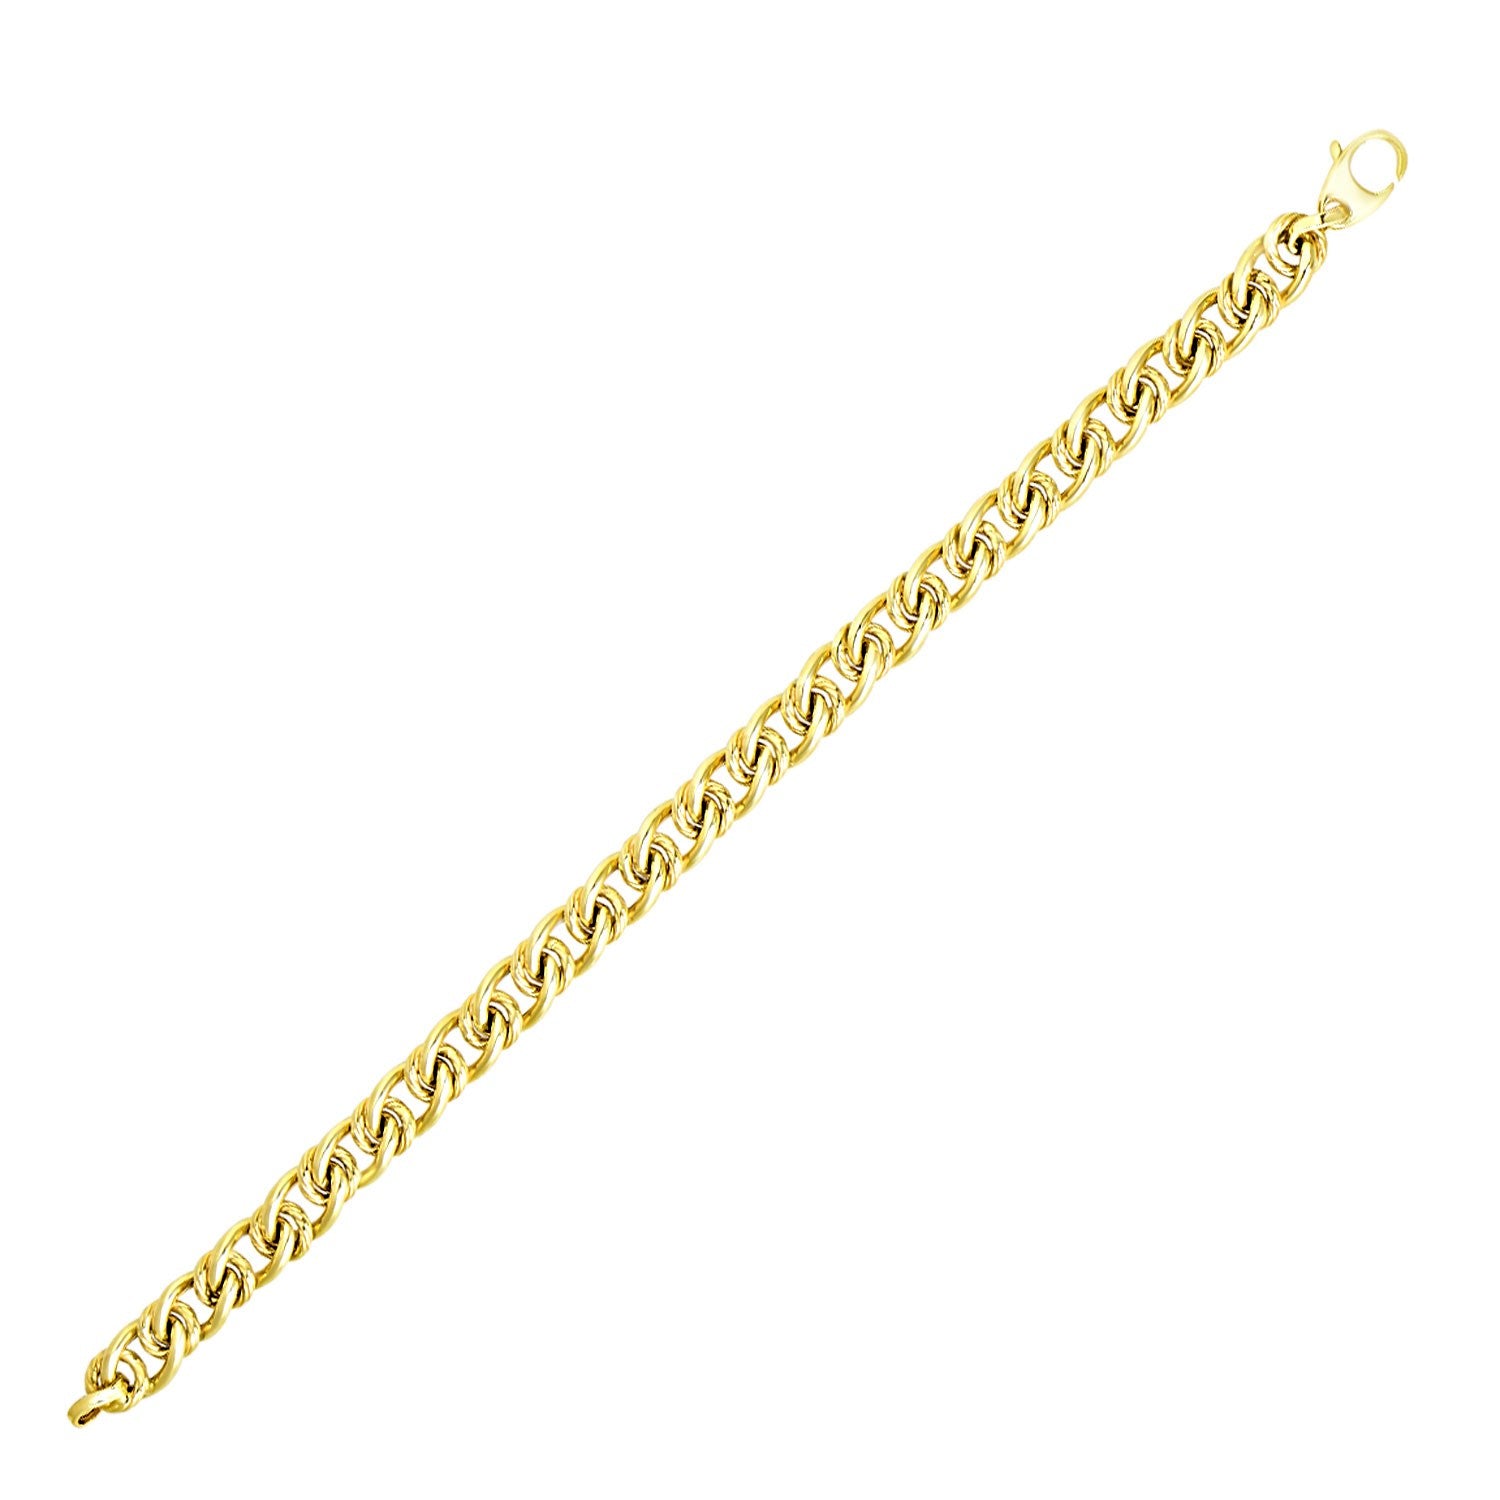 14k Yellow Gold Chain Bracelet with Oval and Textured Round Links